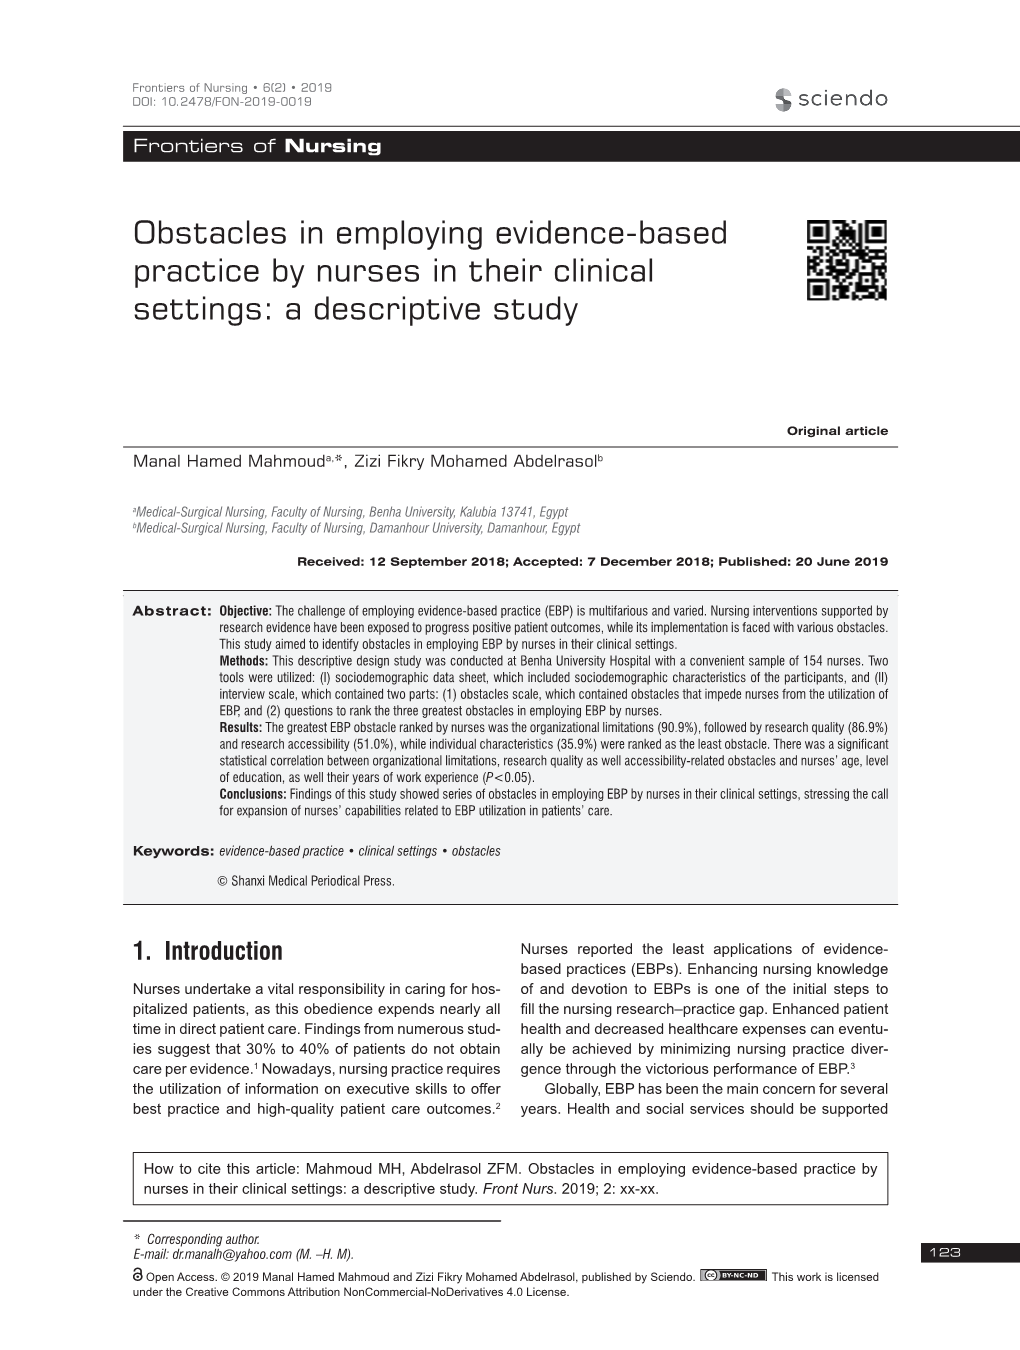 Obstacles in Employing Evidence-Based Practice by Nurses in Their Clinical Settings: a Descriptive Study